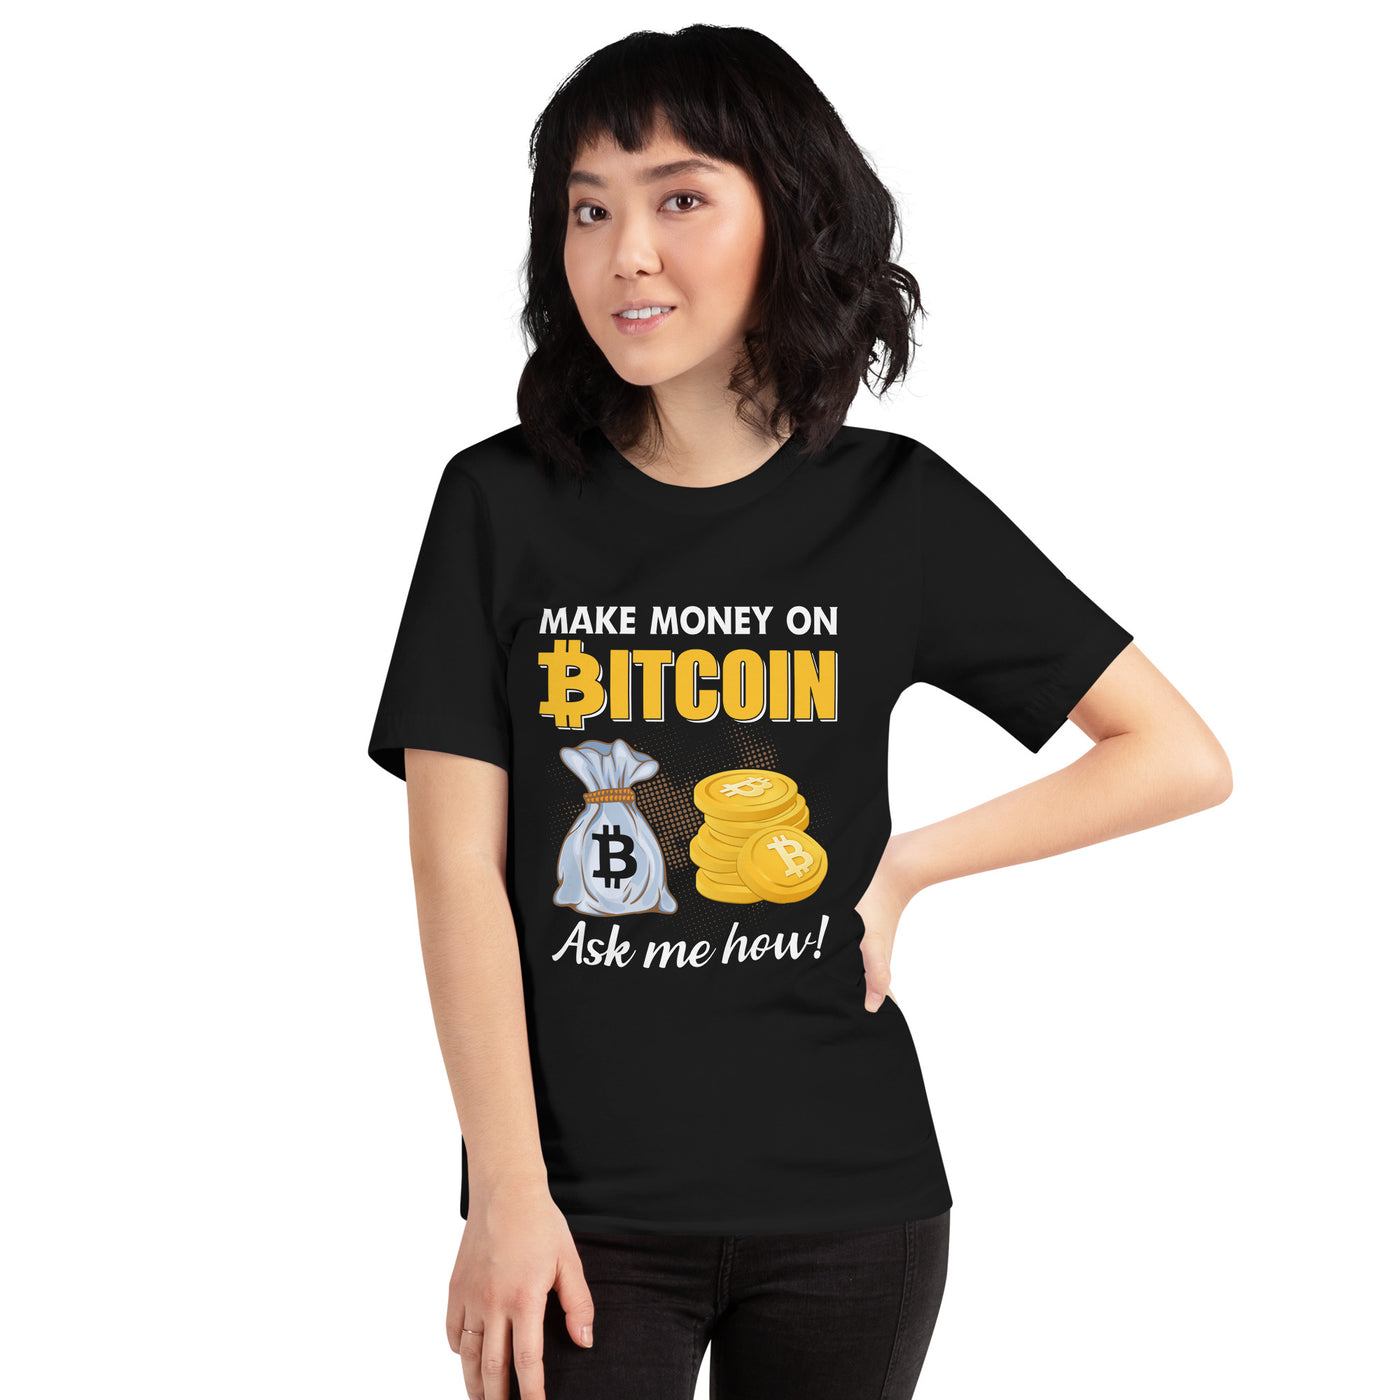 Make money on Bitcoin, Ask me how - Unisex t-shirt